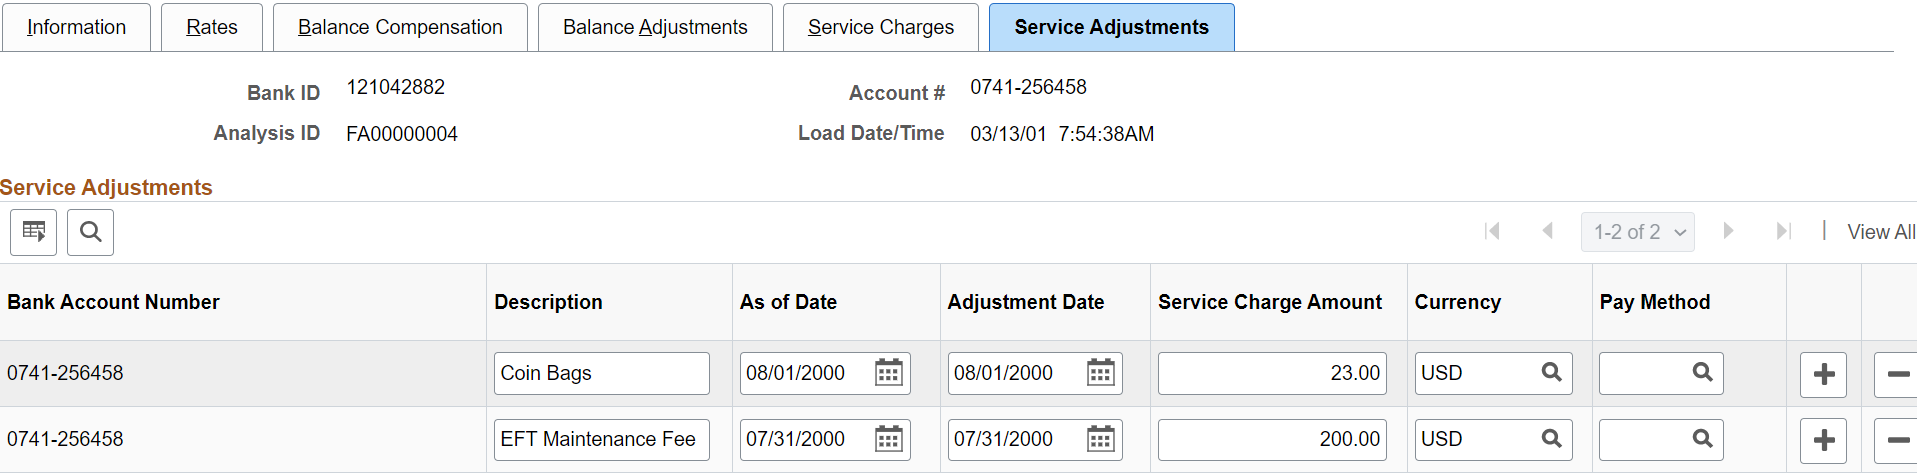 Fee Statements - Service Adjustments page